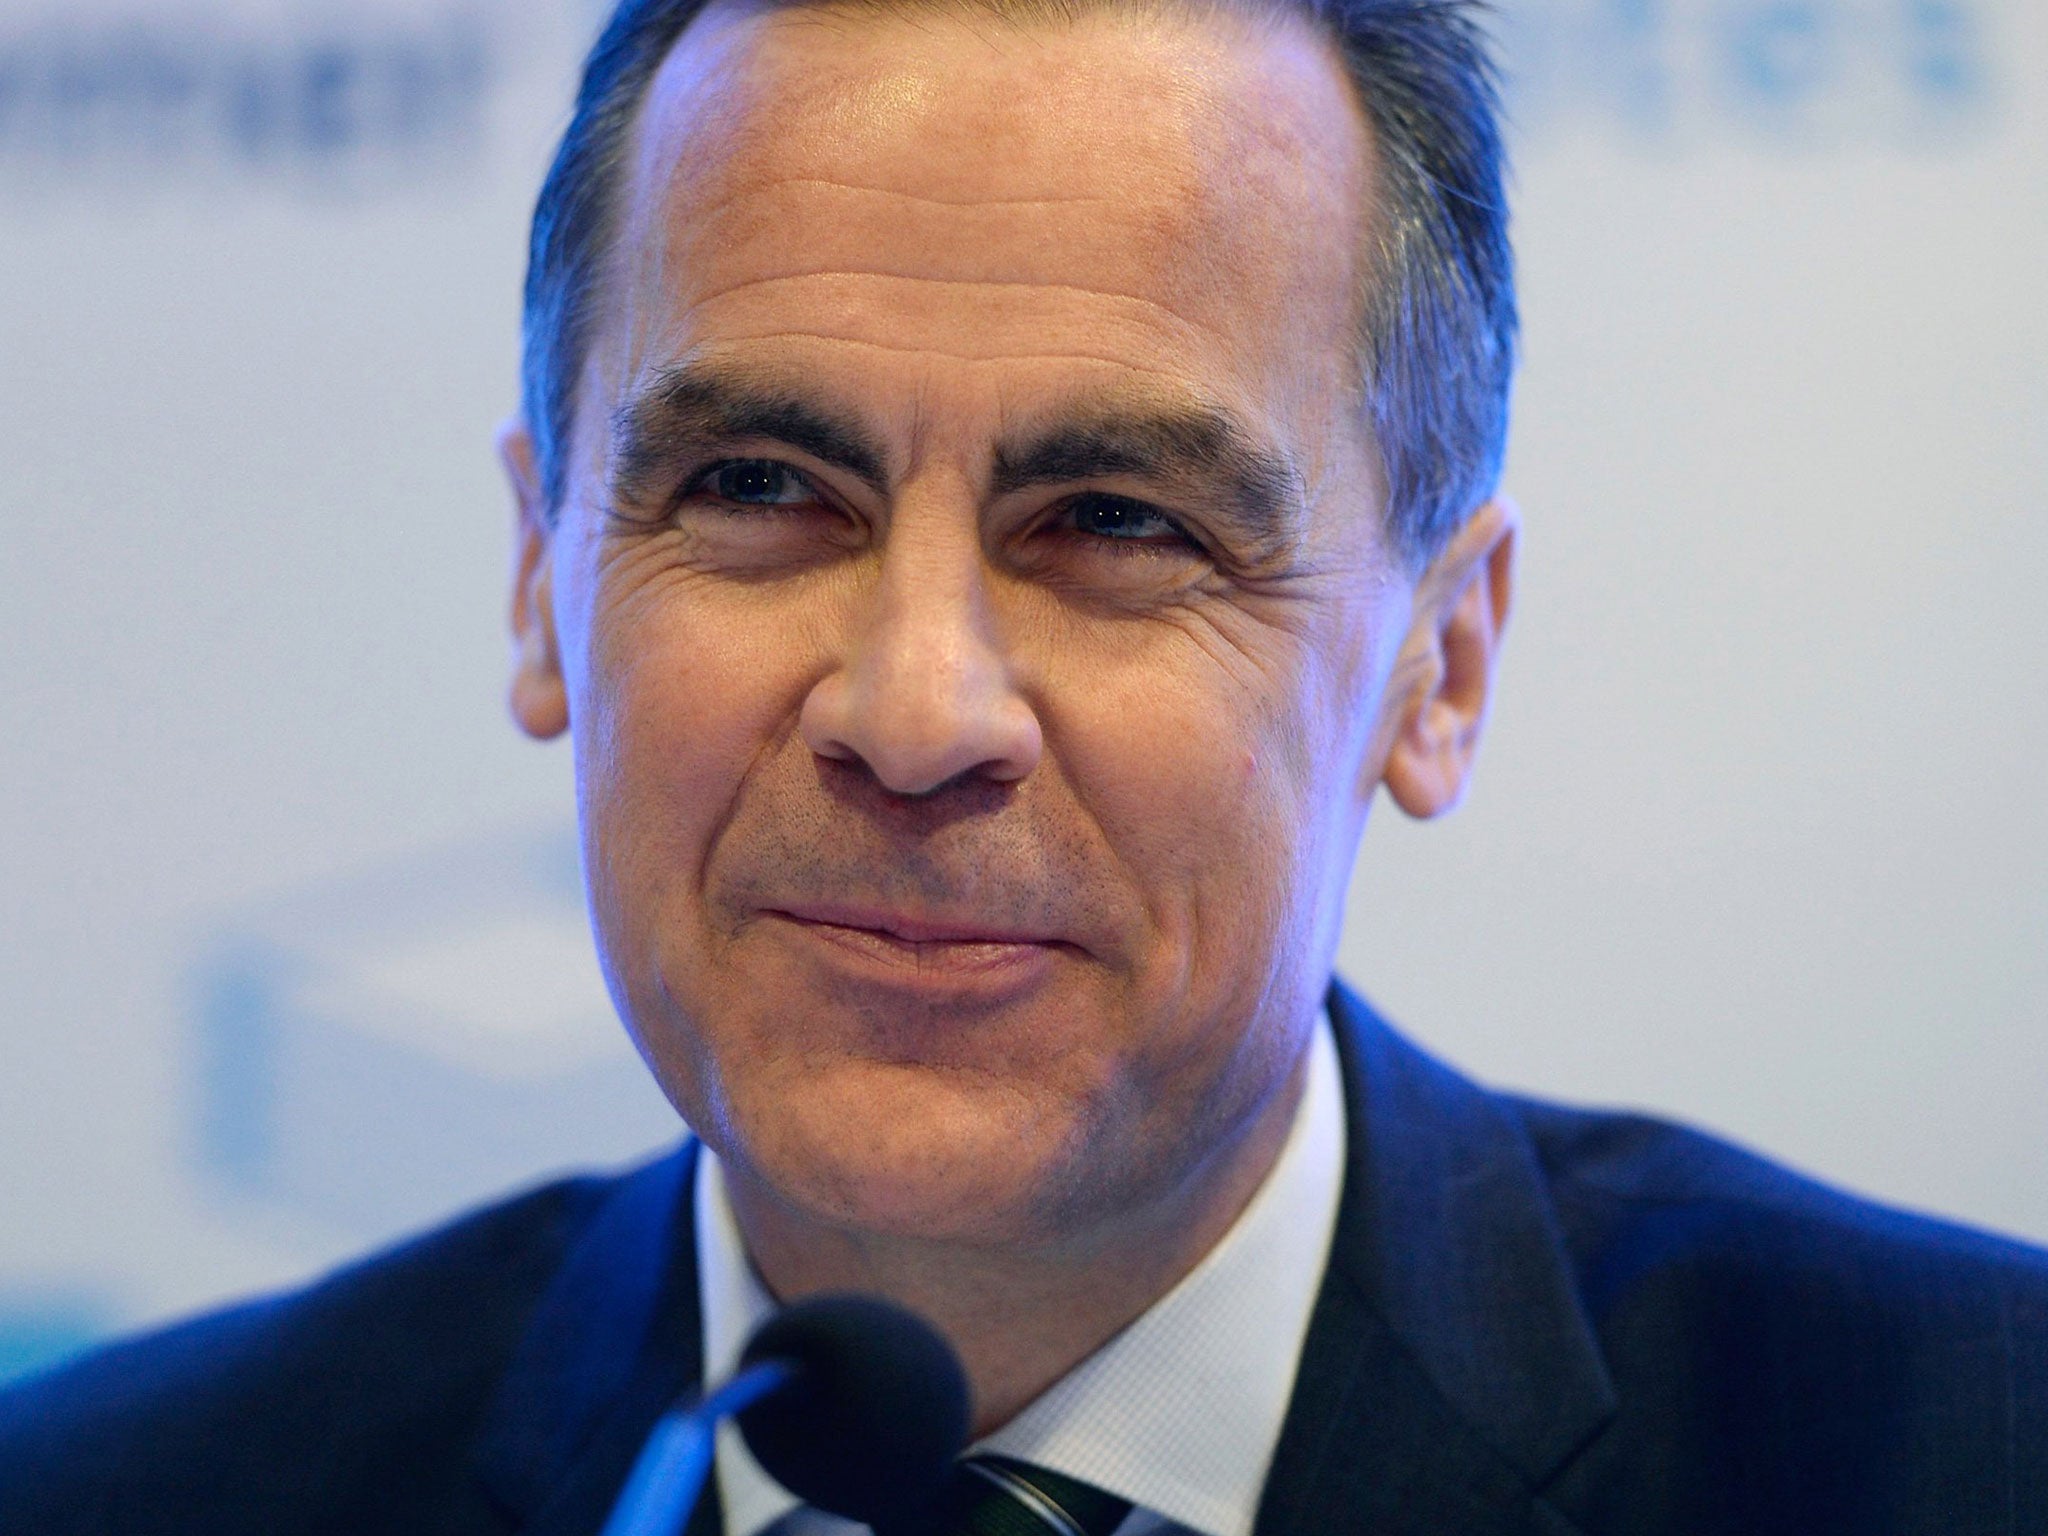 Governor of the Bank of England Mark Carney speaks at a news conference